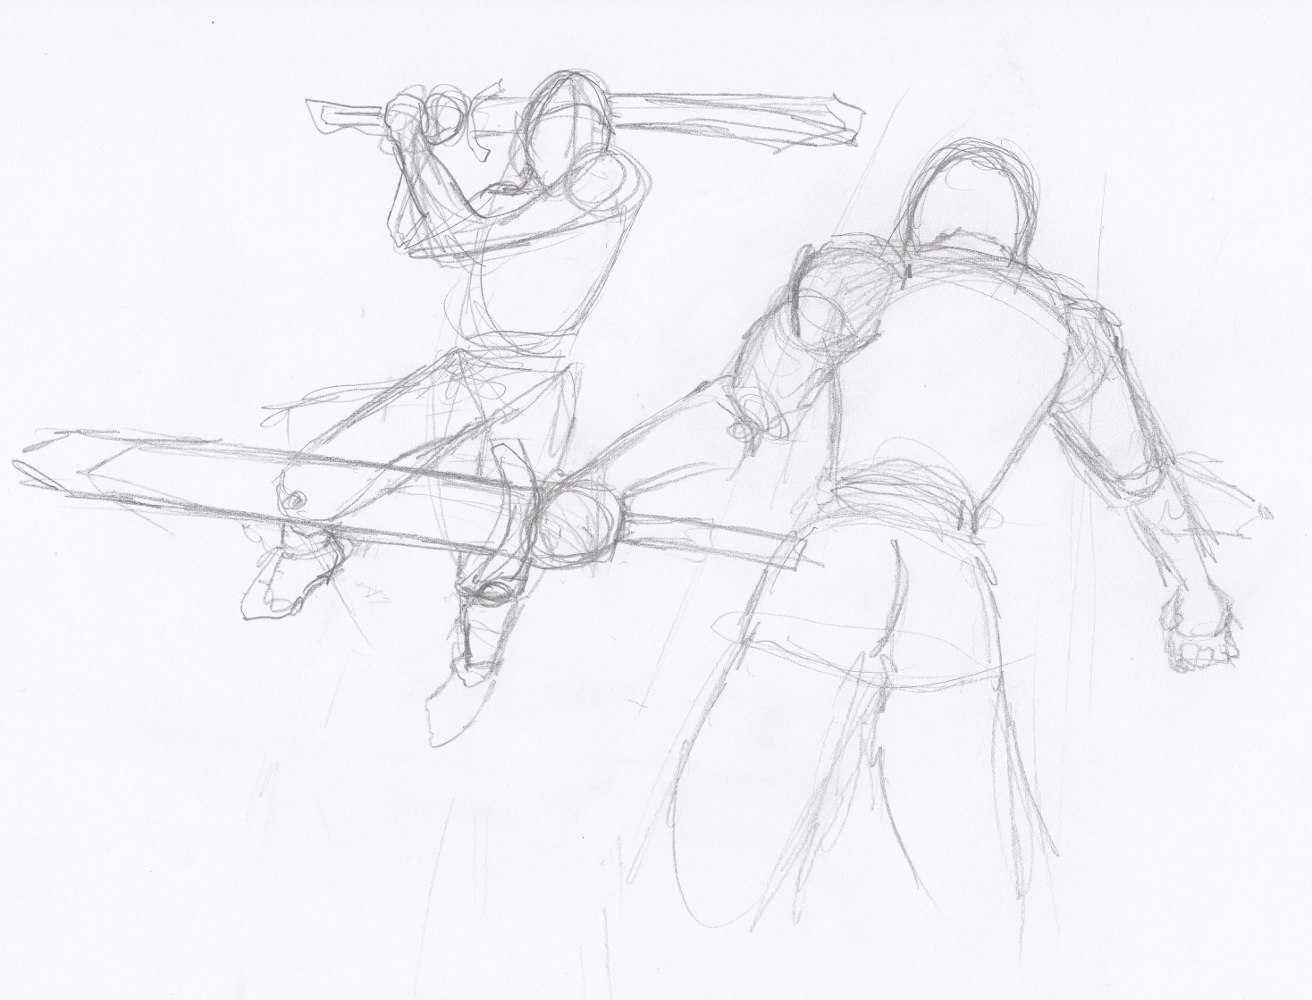 Perspective Sketches - The Sword Fight by EvilSqueegee on DeviantArt